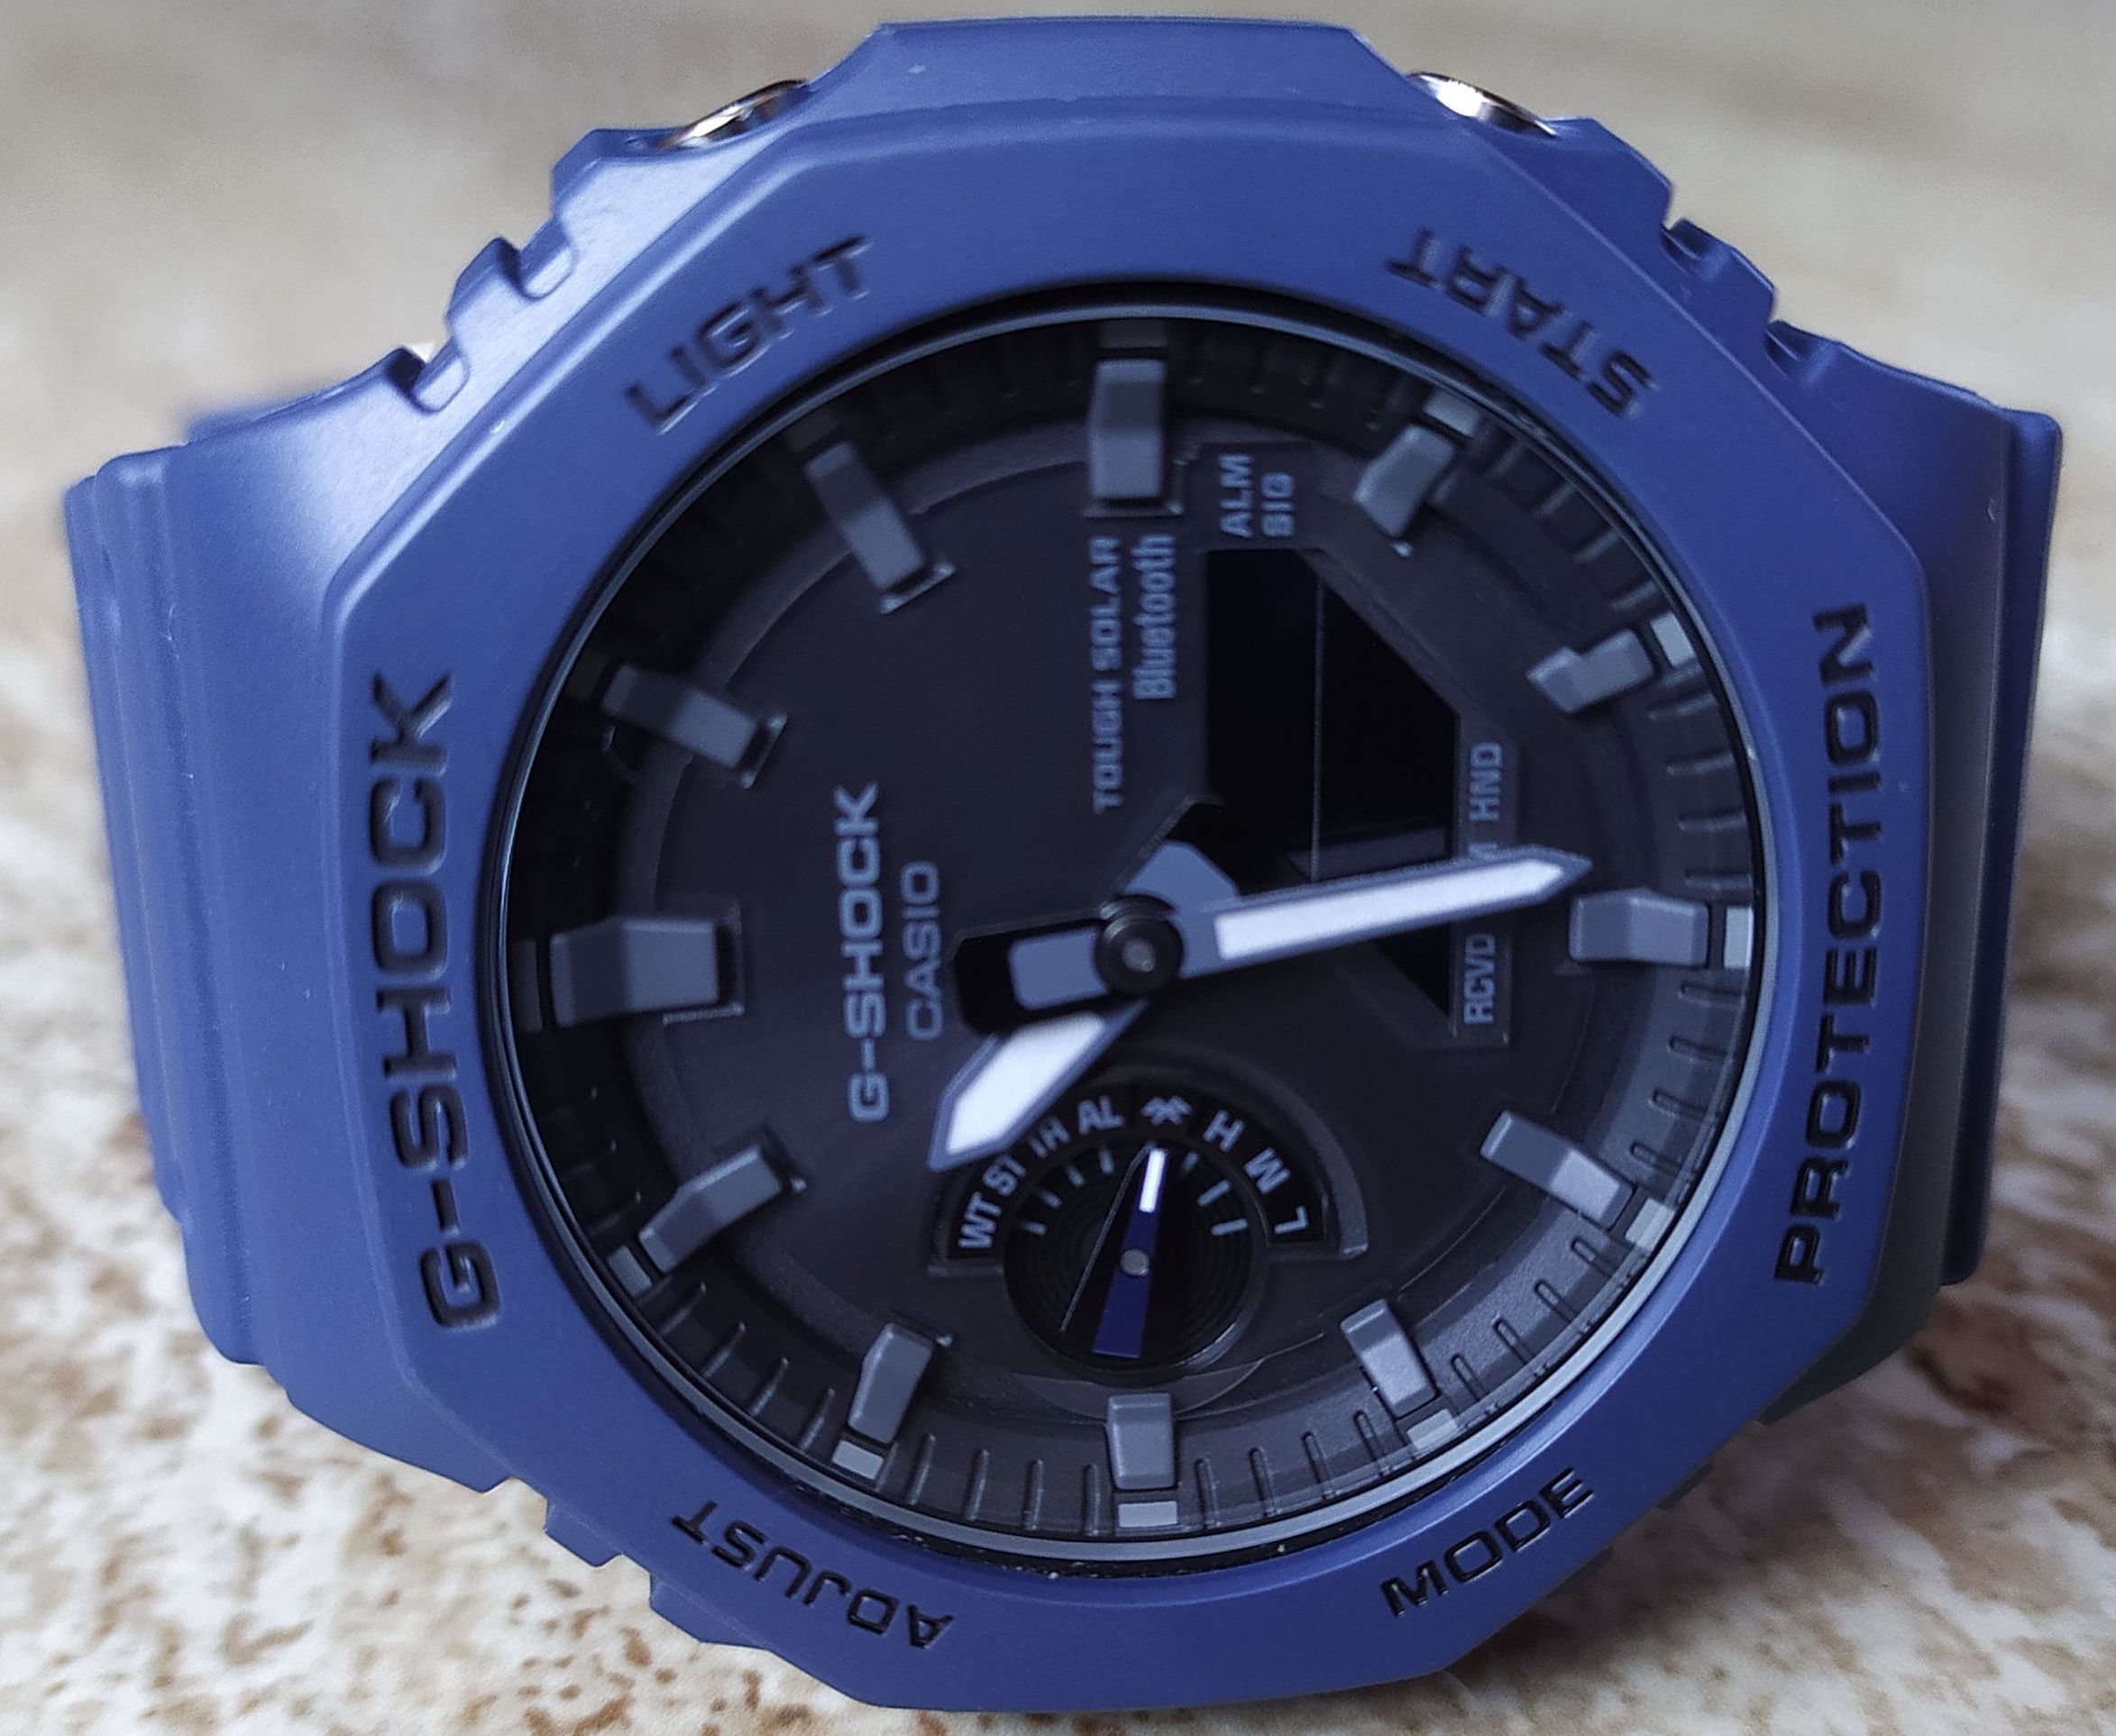 Hands on Review: Casio G-Shock GA-B2100